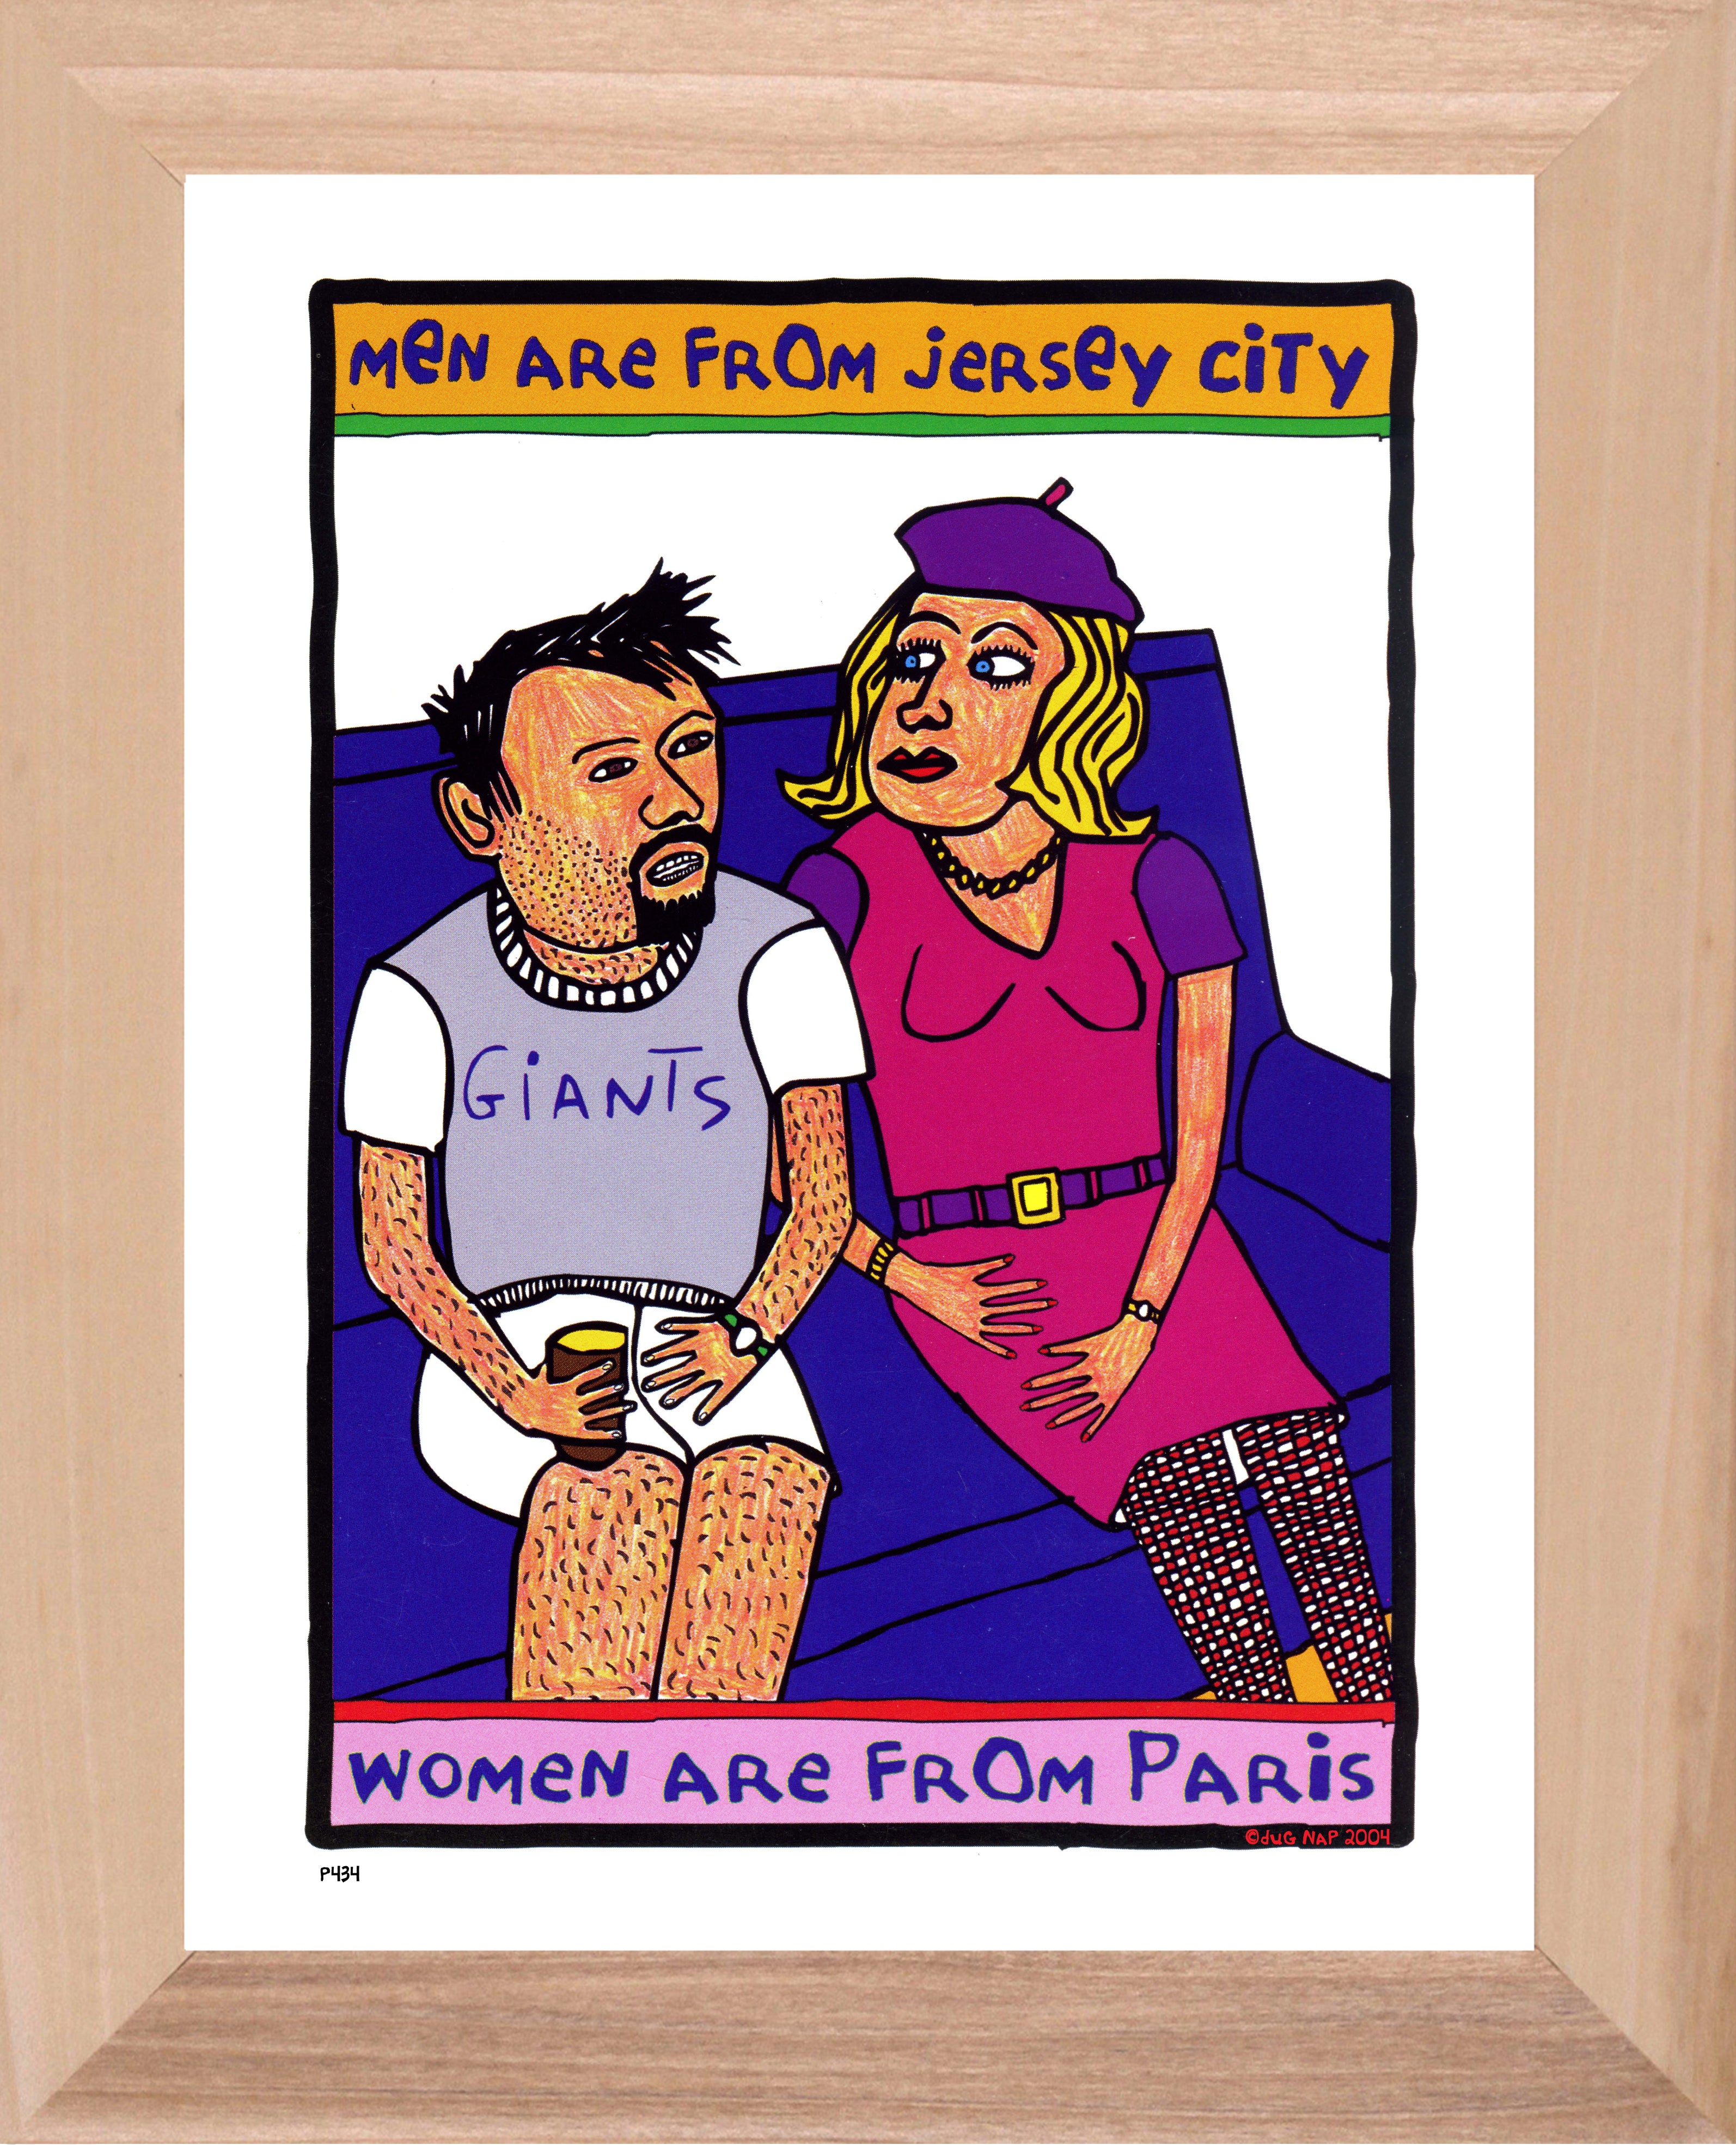 P434 - Men From Jersey